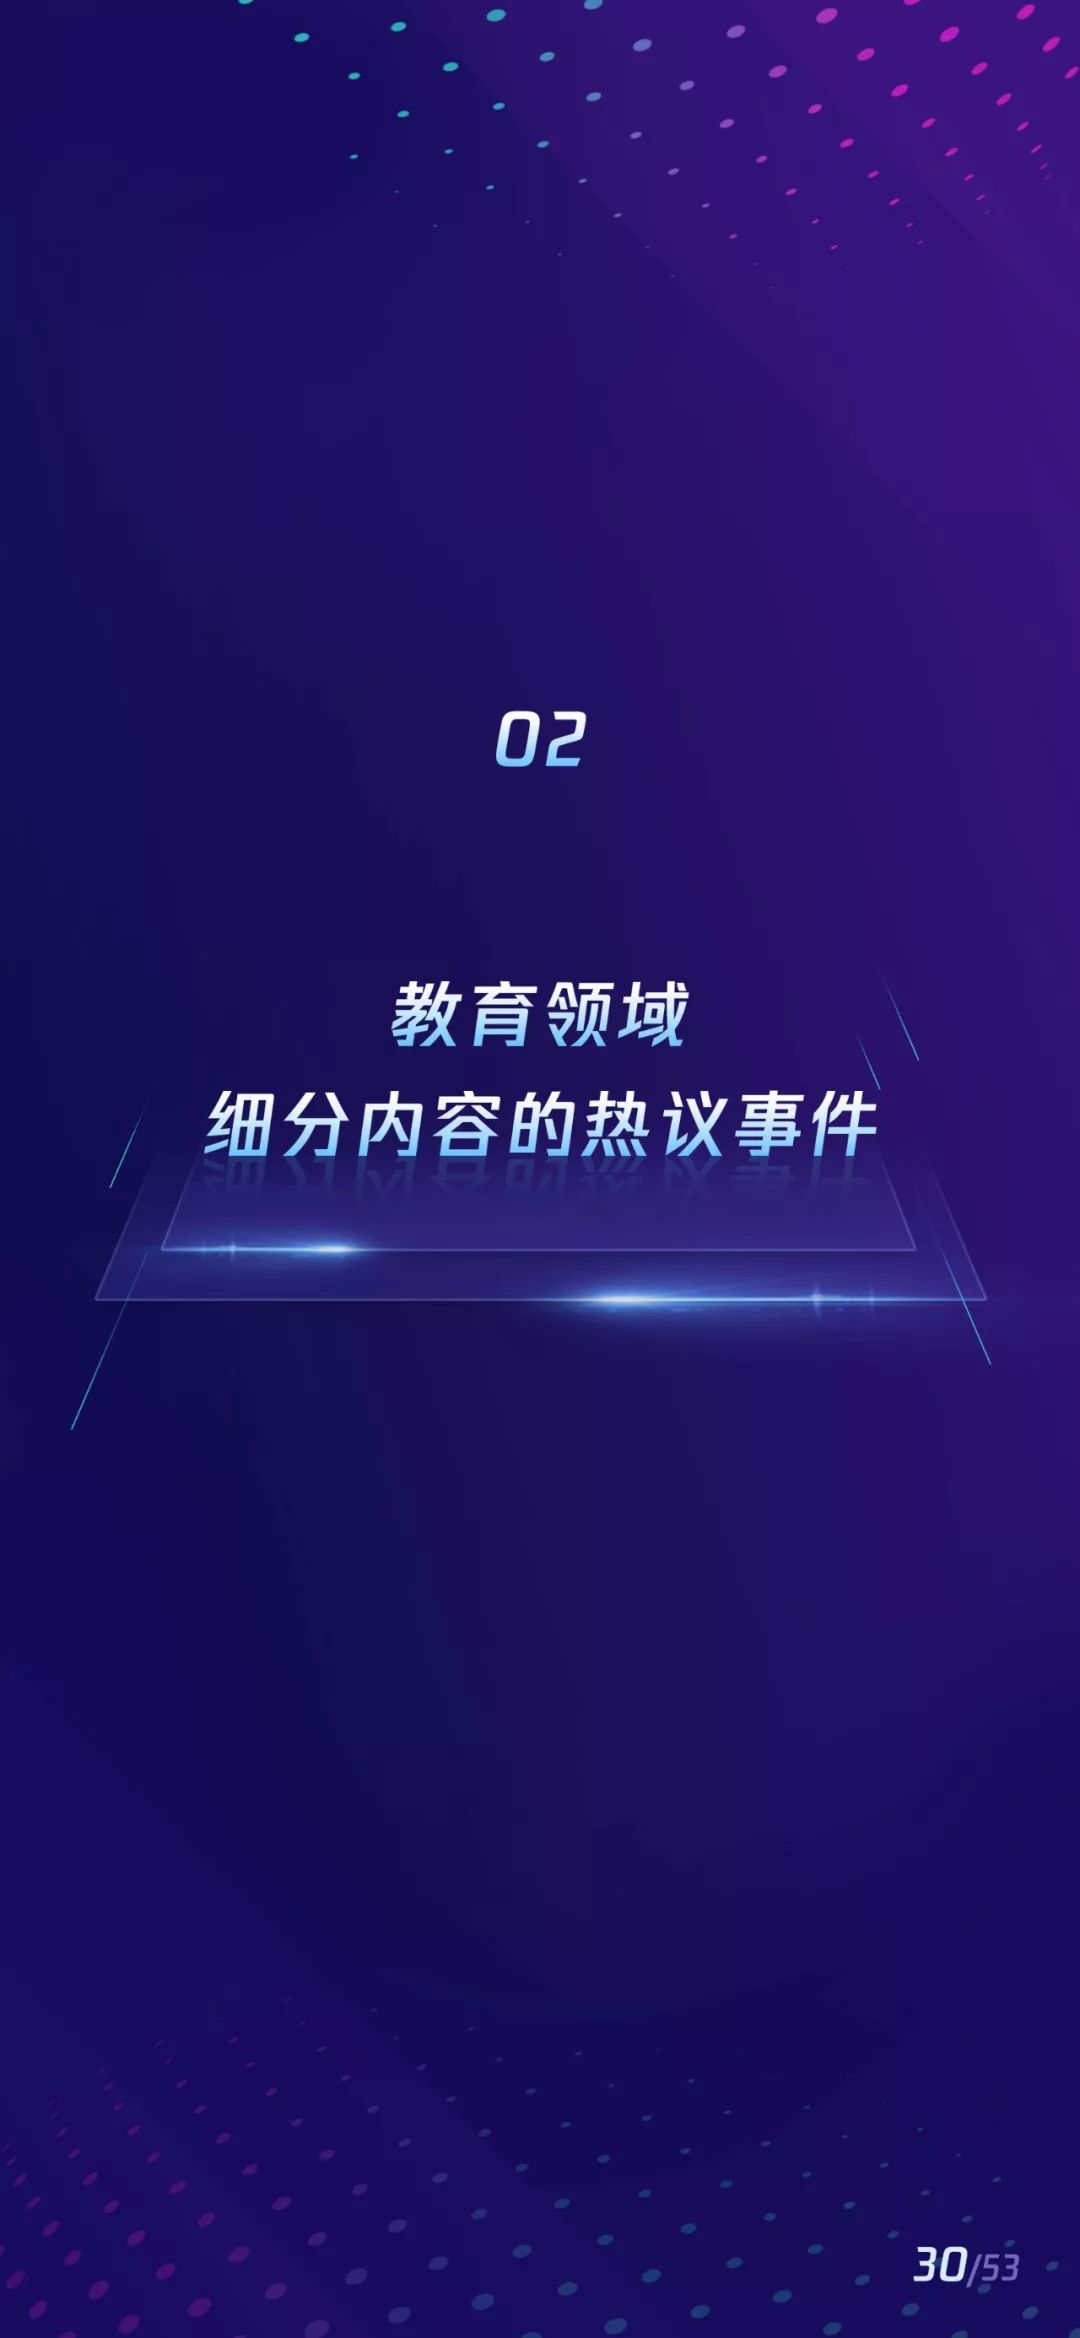 Tencent News ConTech Data Lab releases new education content distribution report for 2019